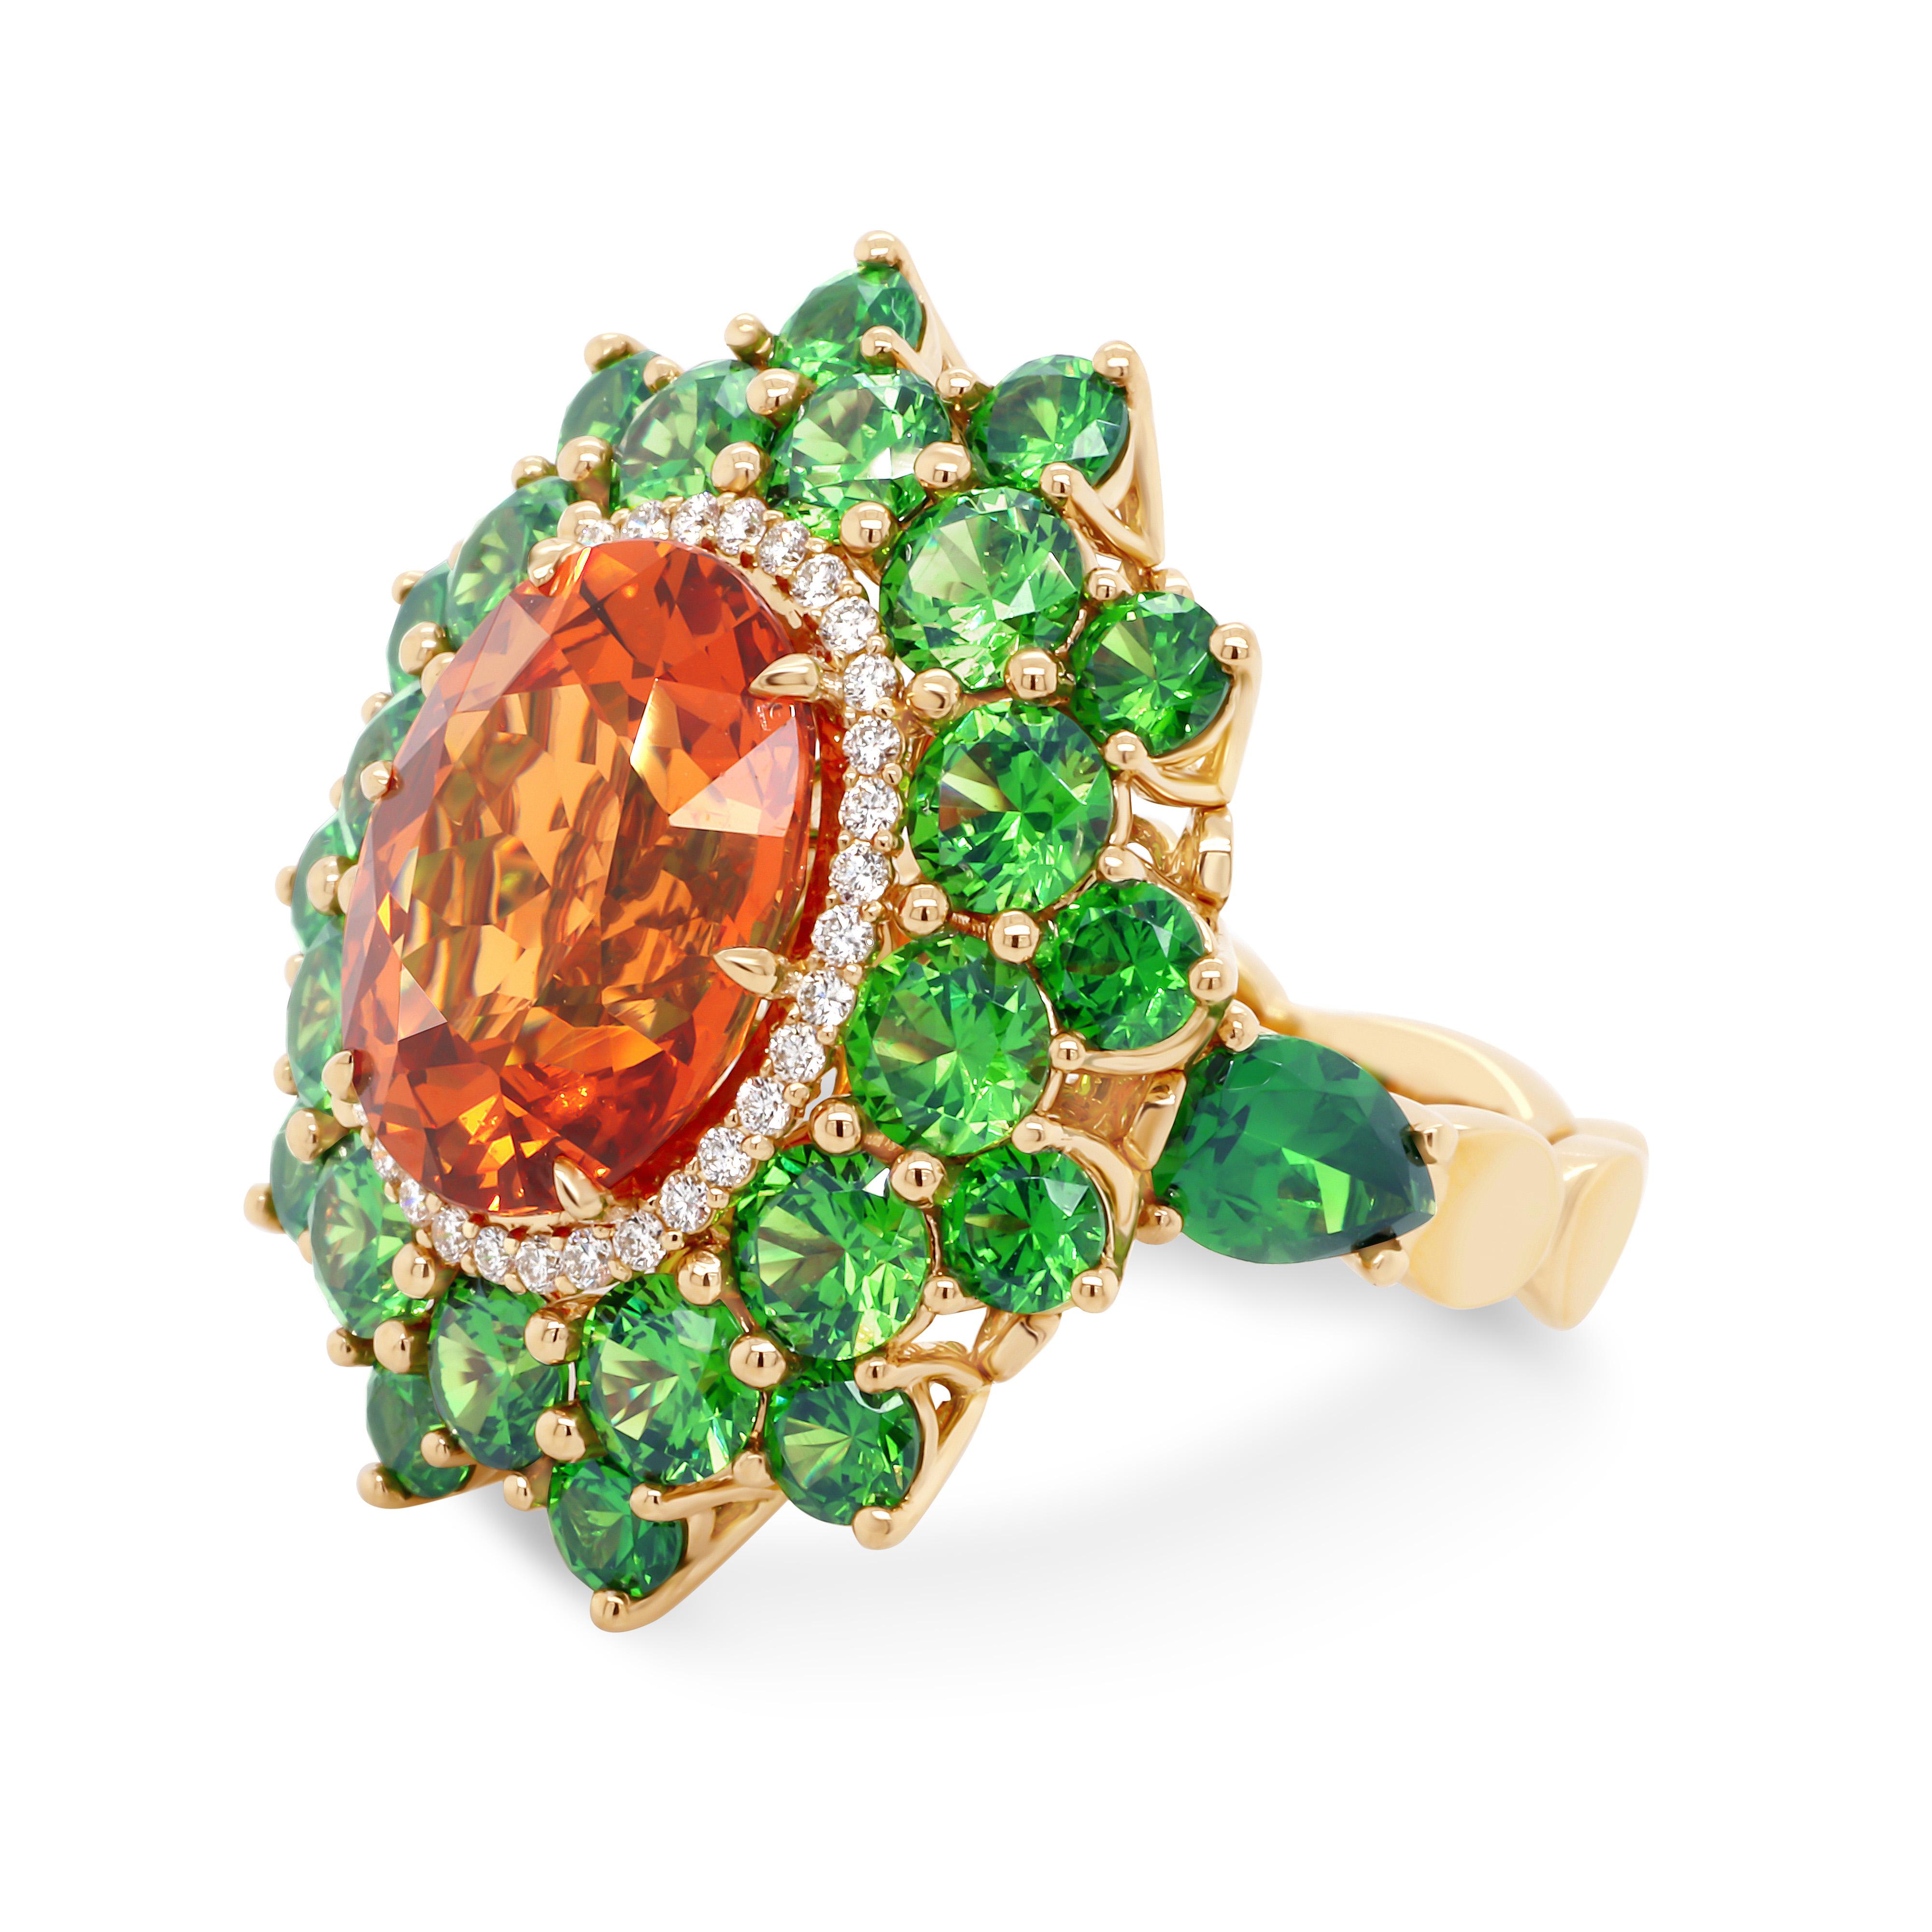 Exceptional posh 18 KT Yellow Gold Ring with 7.64 ct Spessartine. Center stone accented with unique Russian Demantoids totaling 6.13 ct. The ring is also set with Diamonds G-H color and VVS1 clarity, the total weight of 0.2 ct.
Because Spessartine